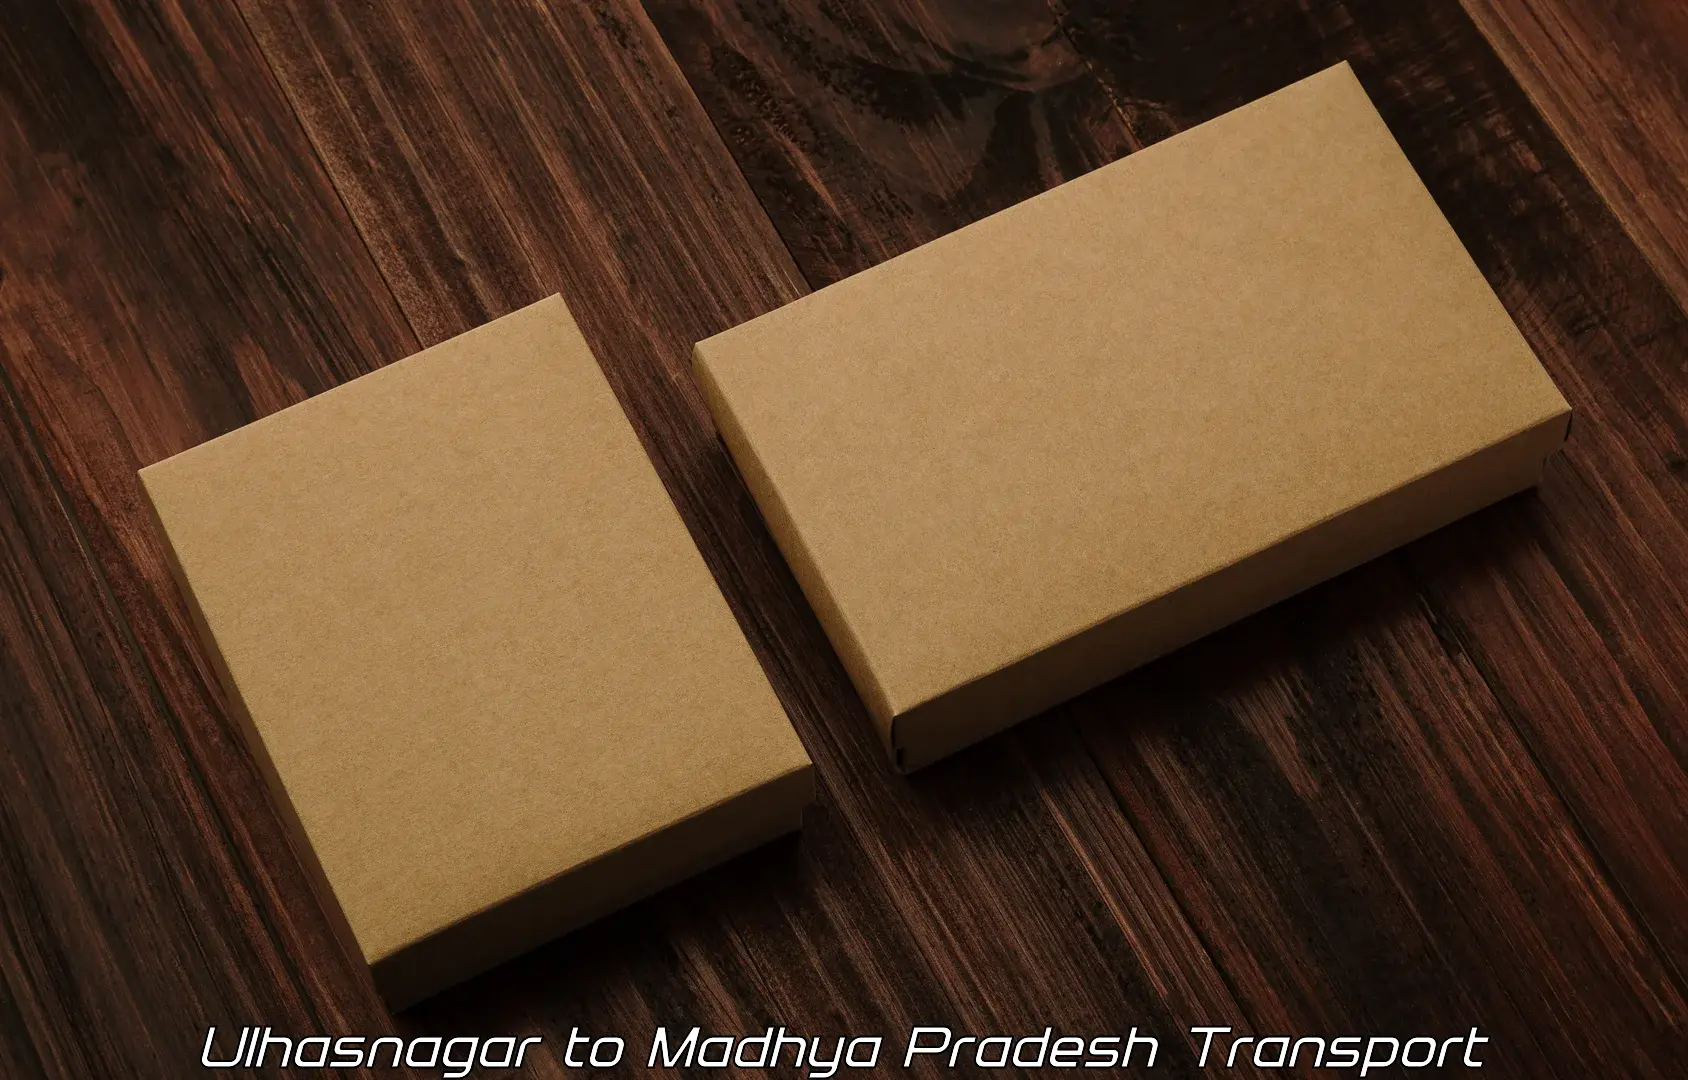 Transport shared services in Ulhasnagar to Shivpuri